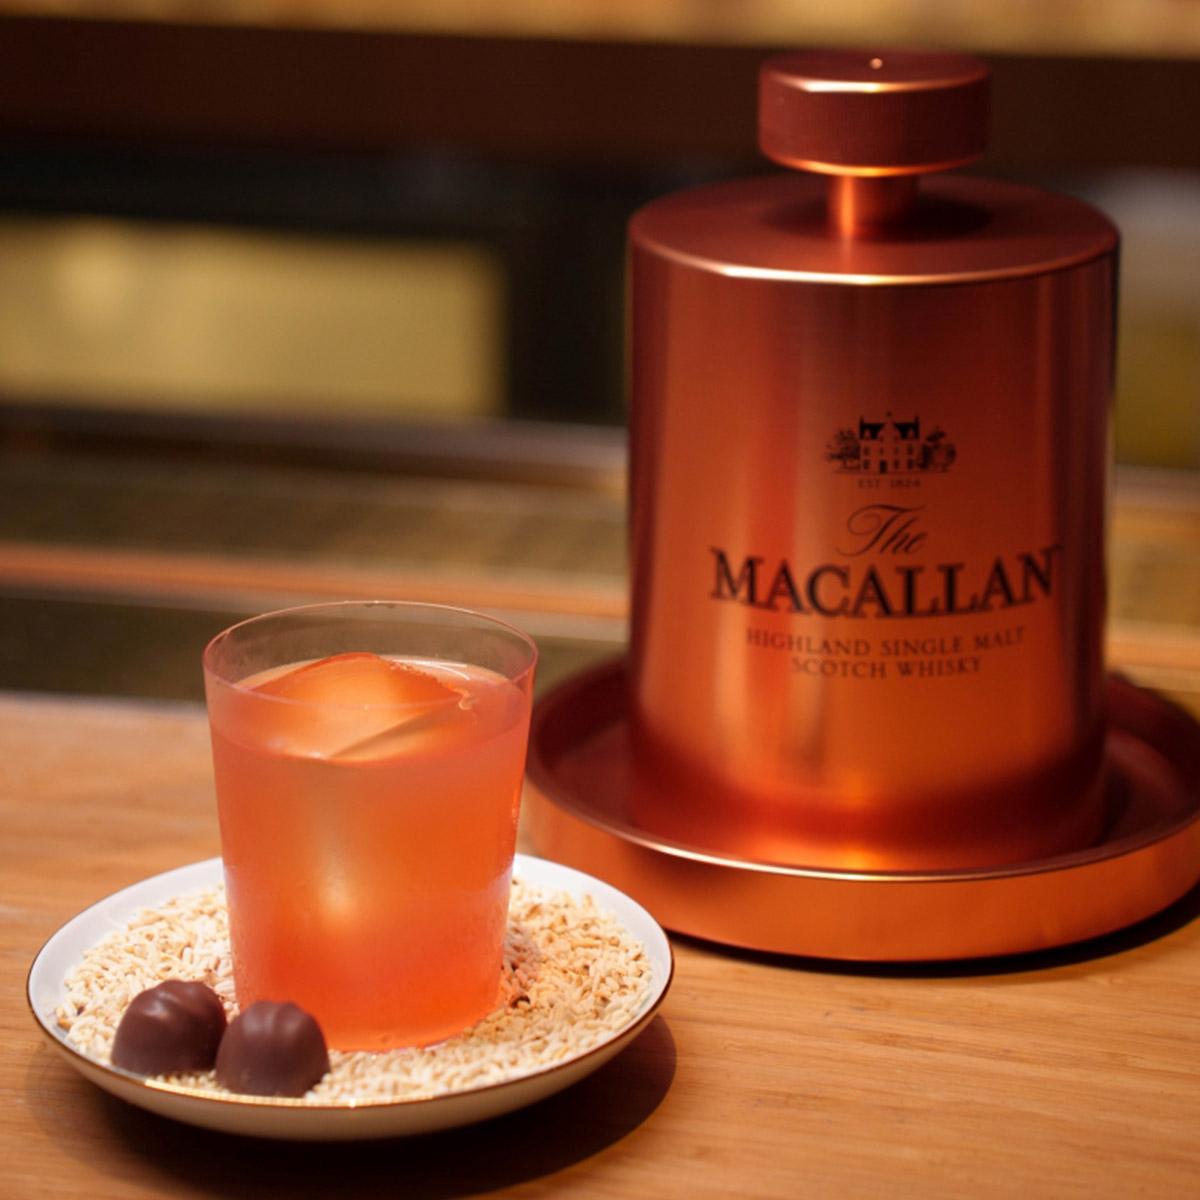 The-Macallan-Double-Cask-Special-Cocktail-From-Macallan-SPACEBAR-Photo_SQ01.jpg